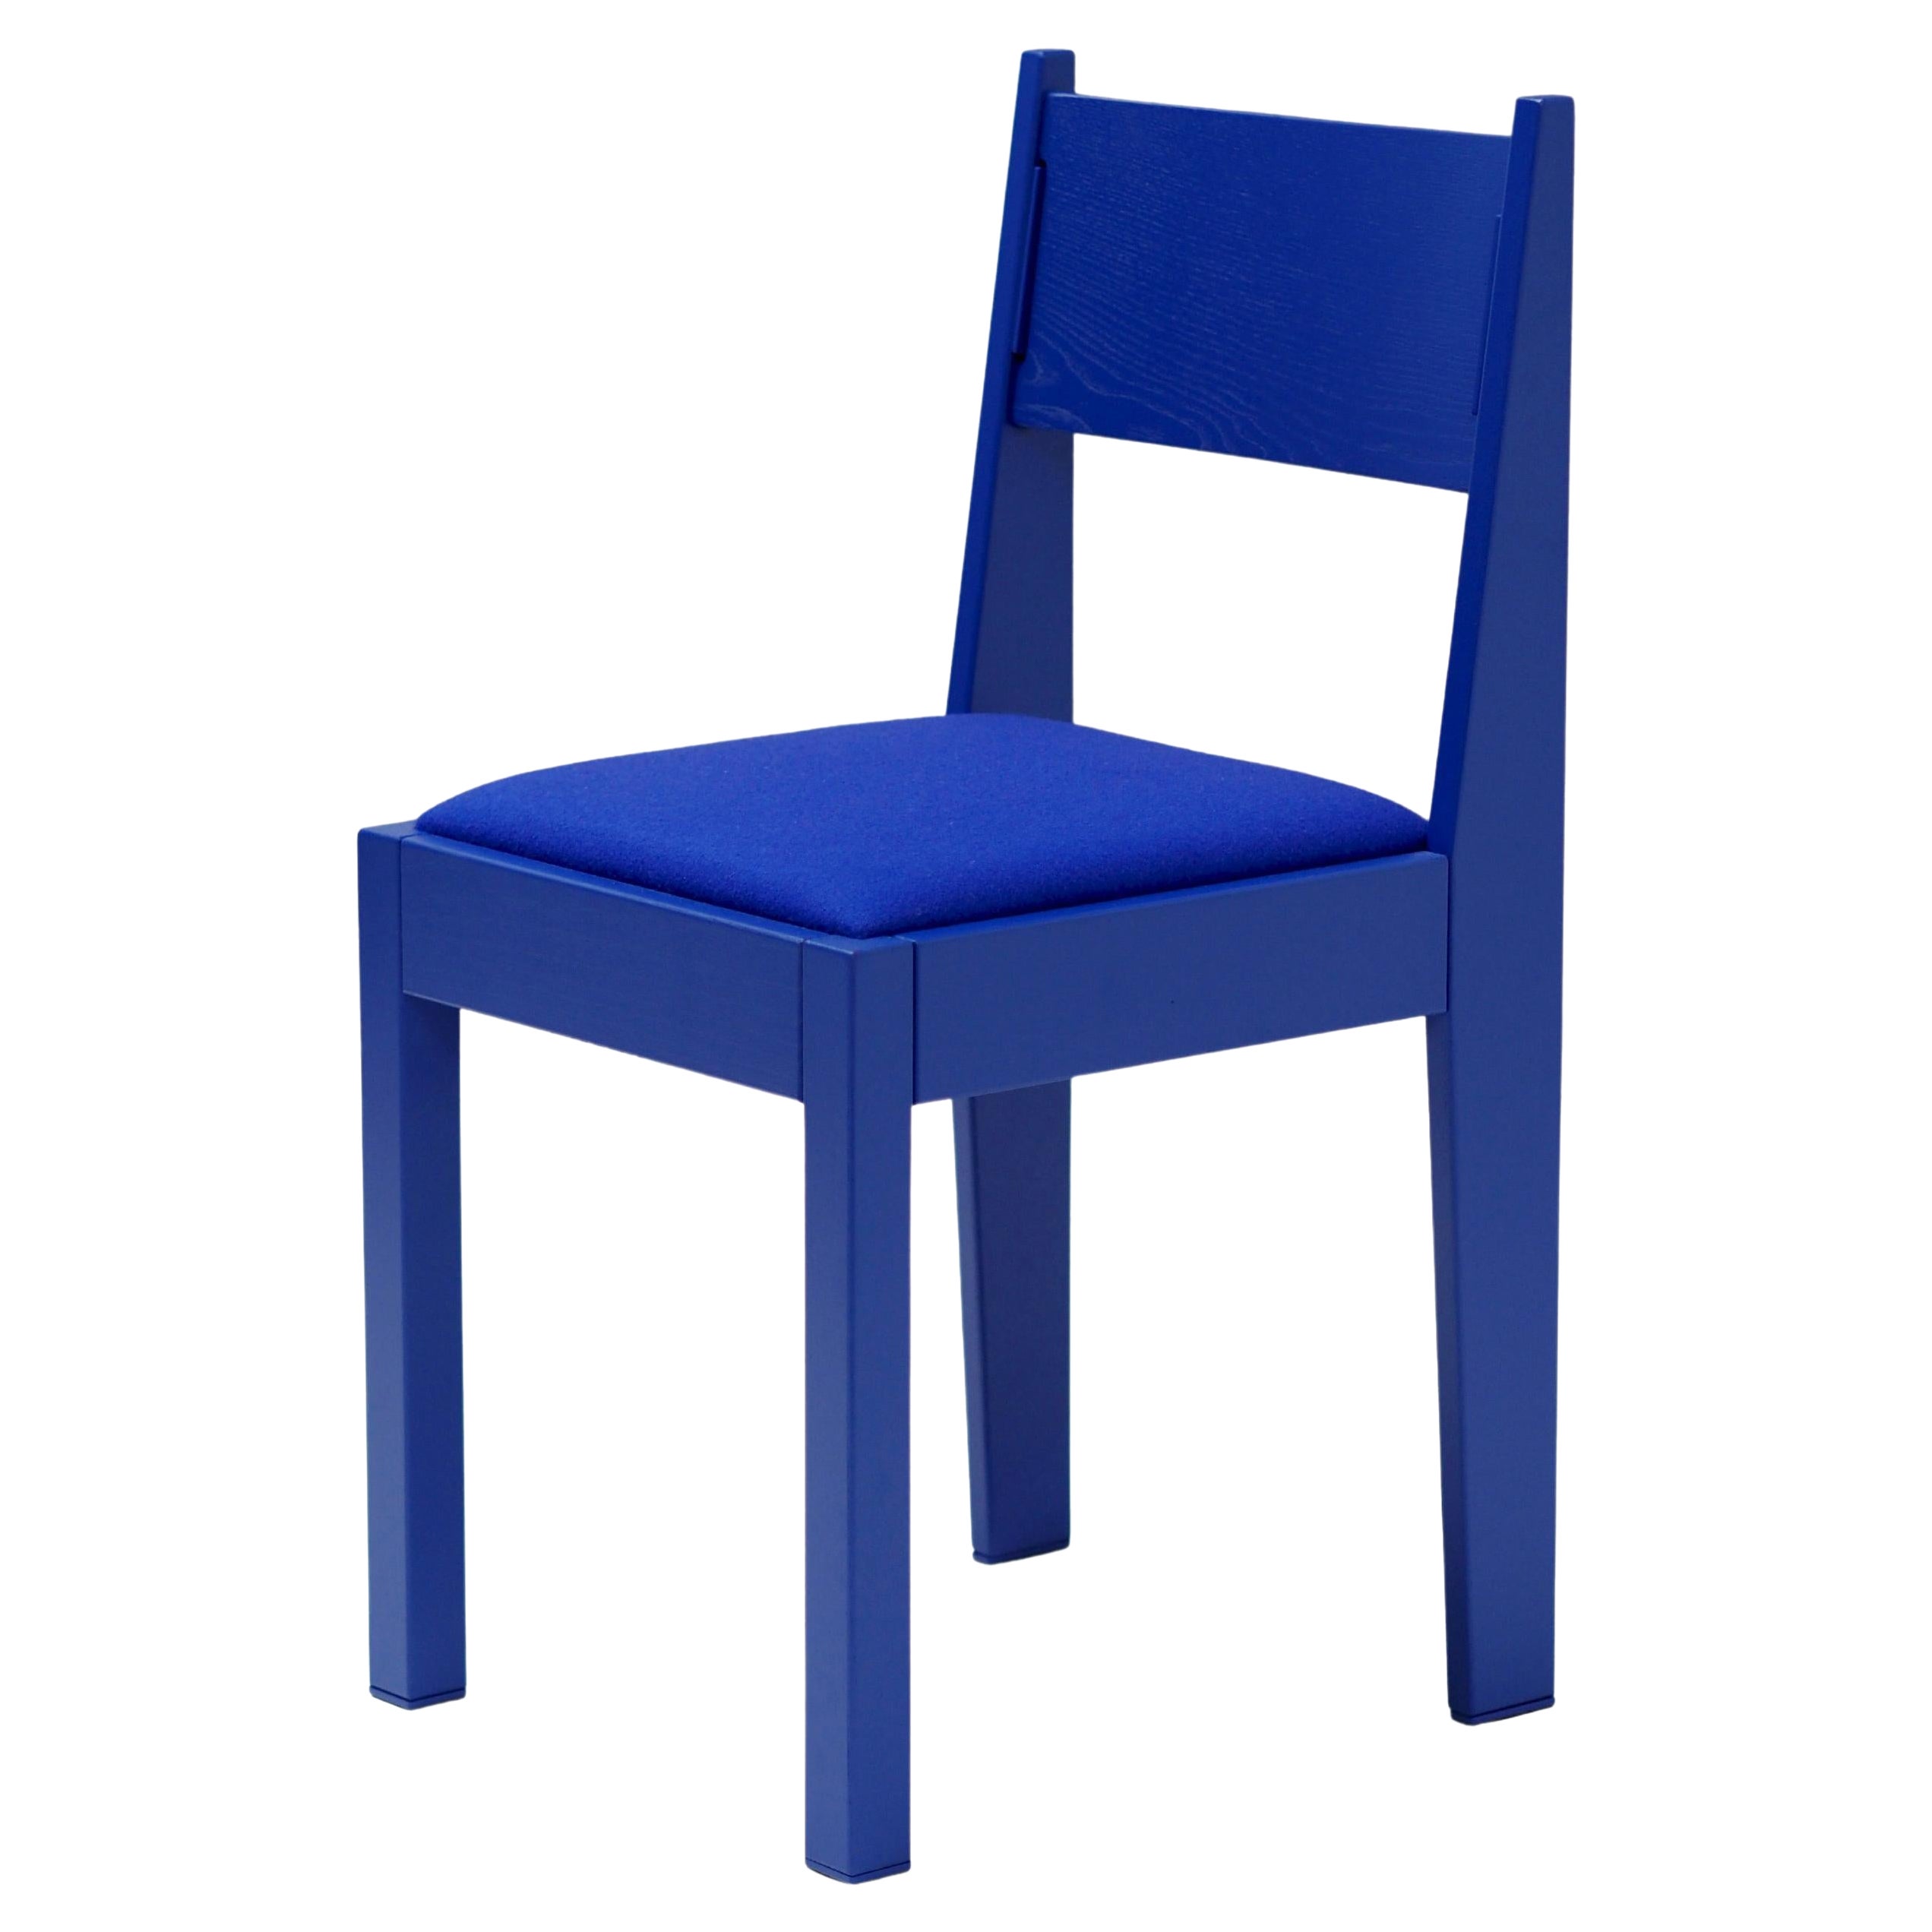 Contemporary Art Deco Chair, Special Edition, IKB Blue, Customizable For Sale